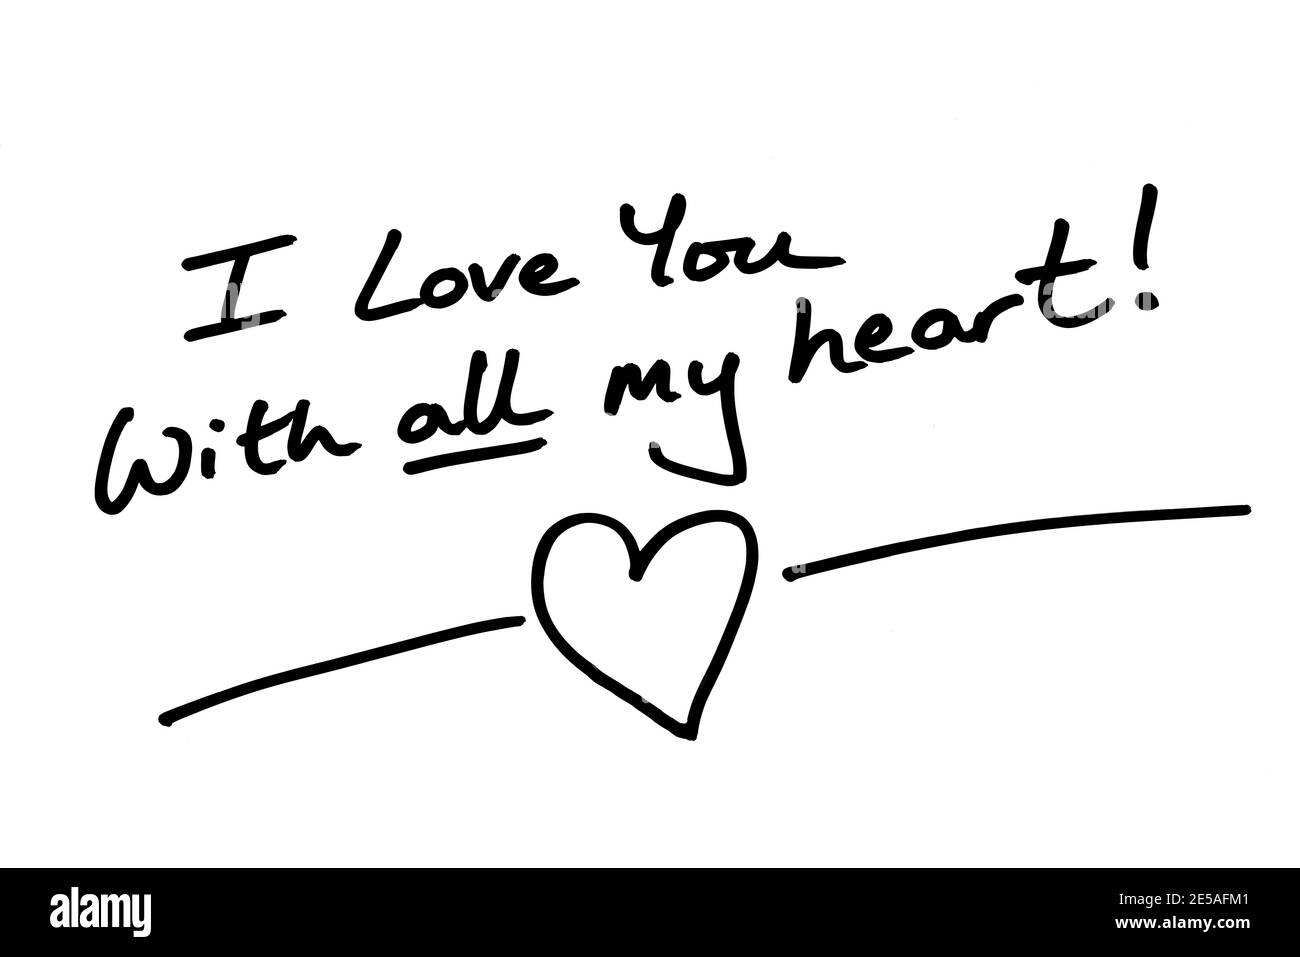 I Love You With All My Heart! handwritten on a white background. Stock Photo